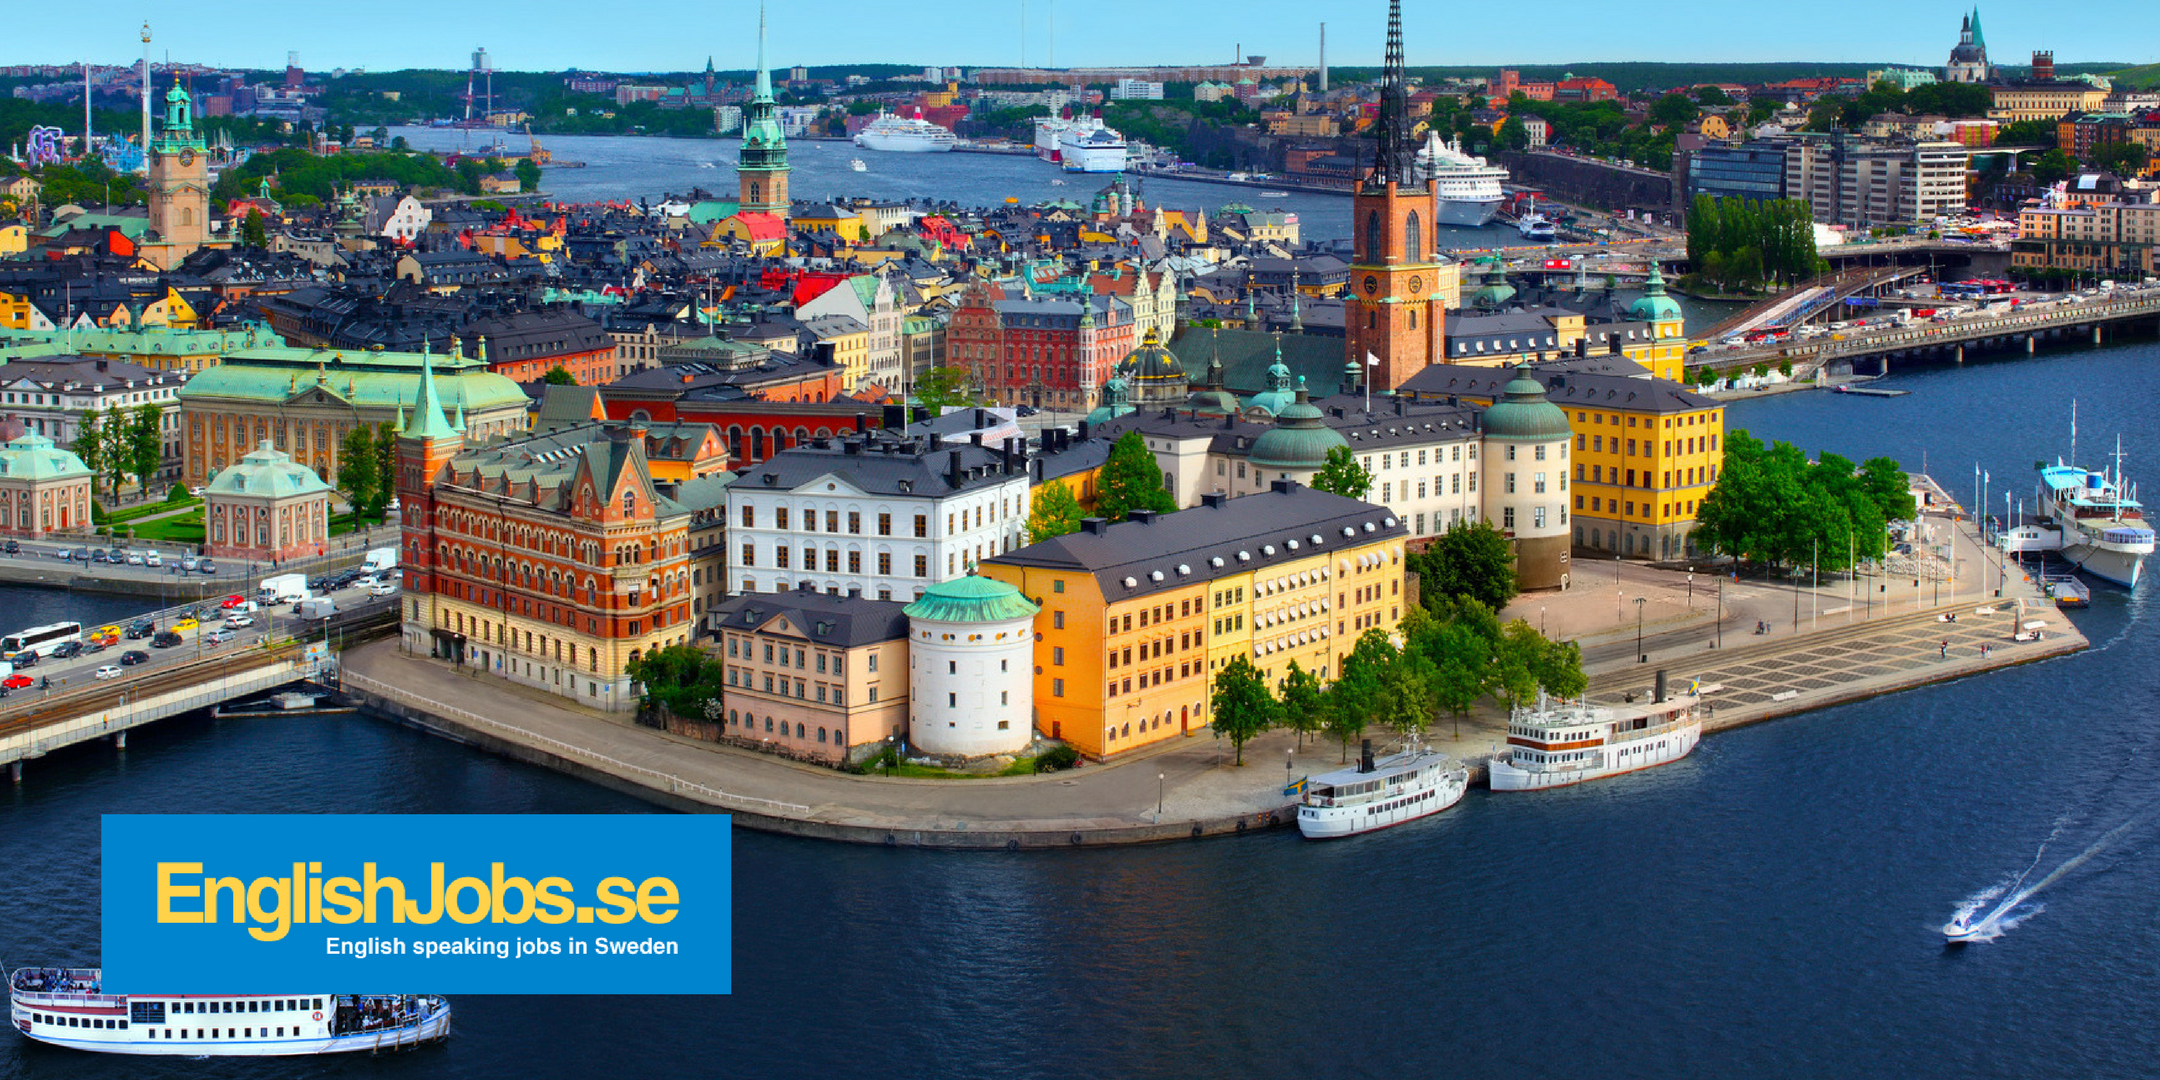 Work in Europe (Sweden, Denmark, Germany) - Your job search from Atlanta to Stockholm